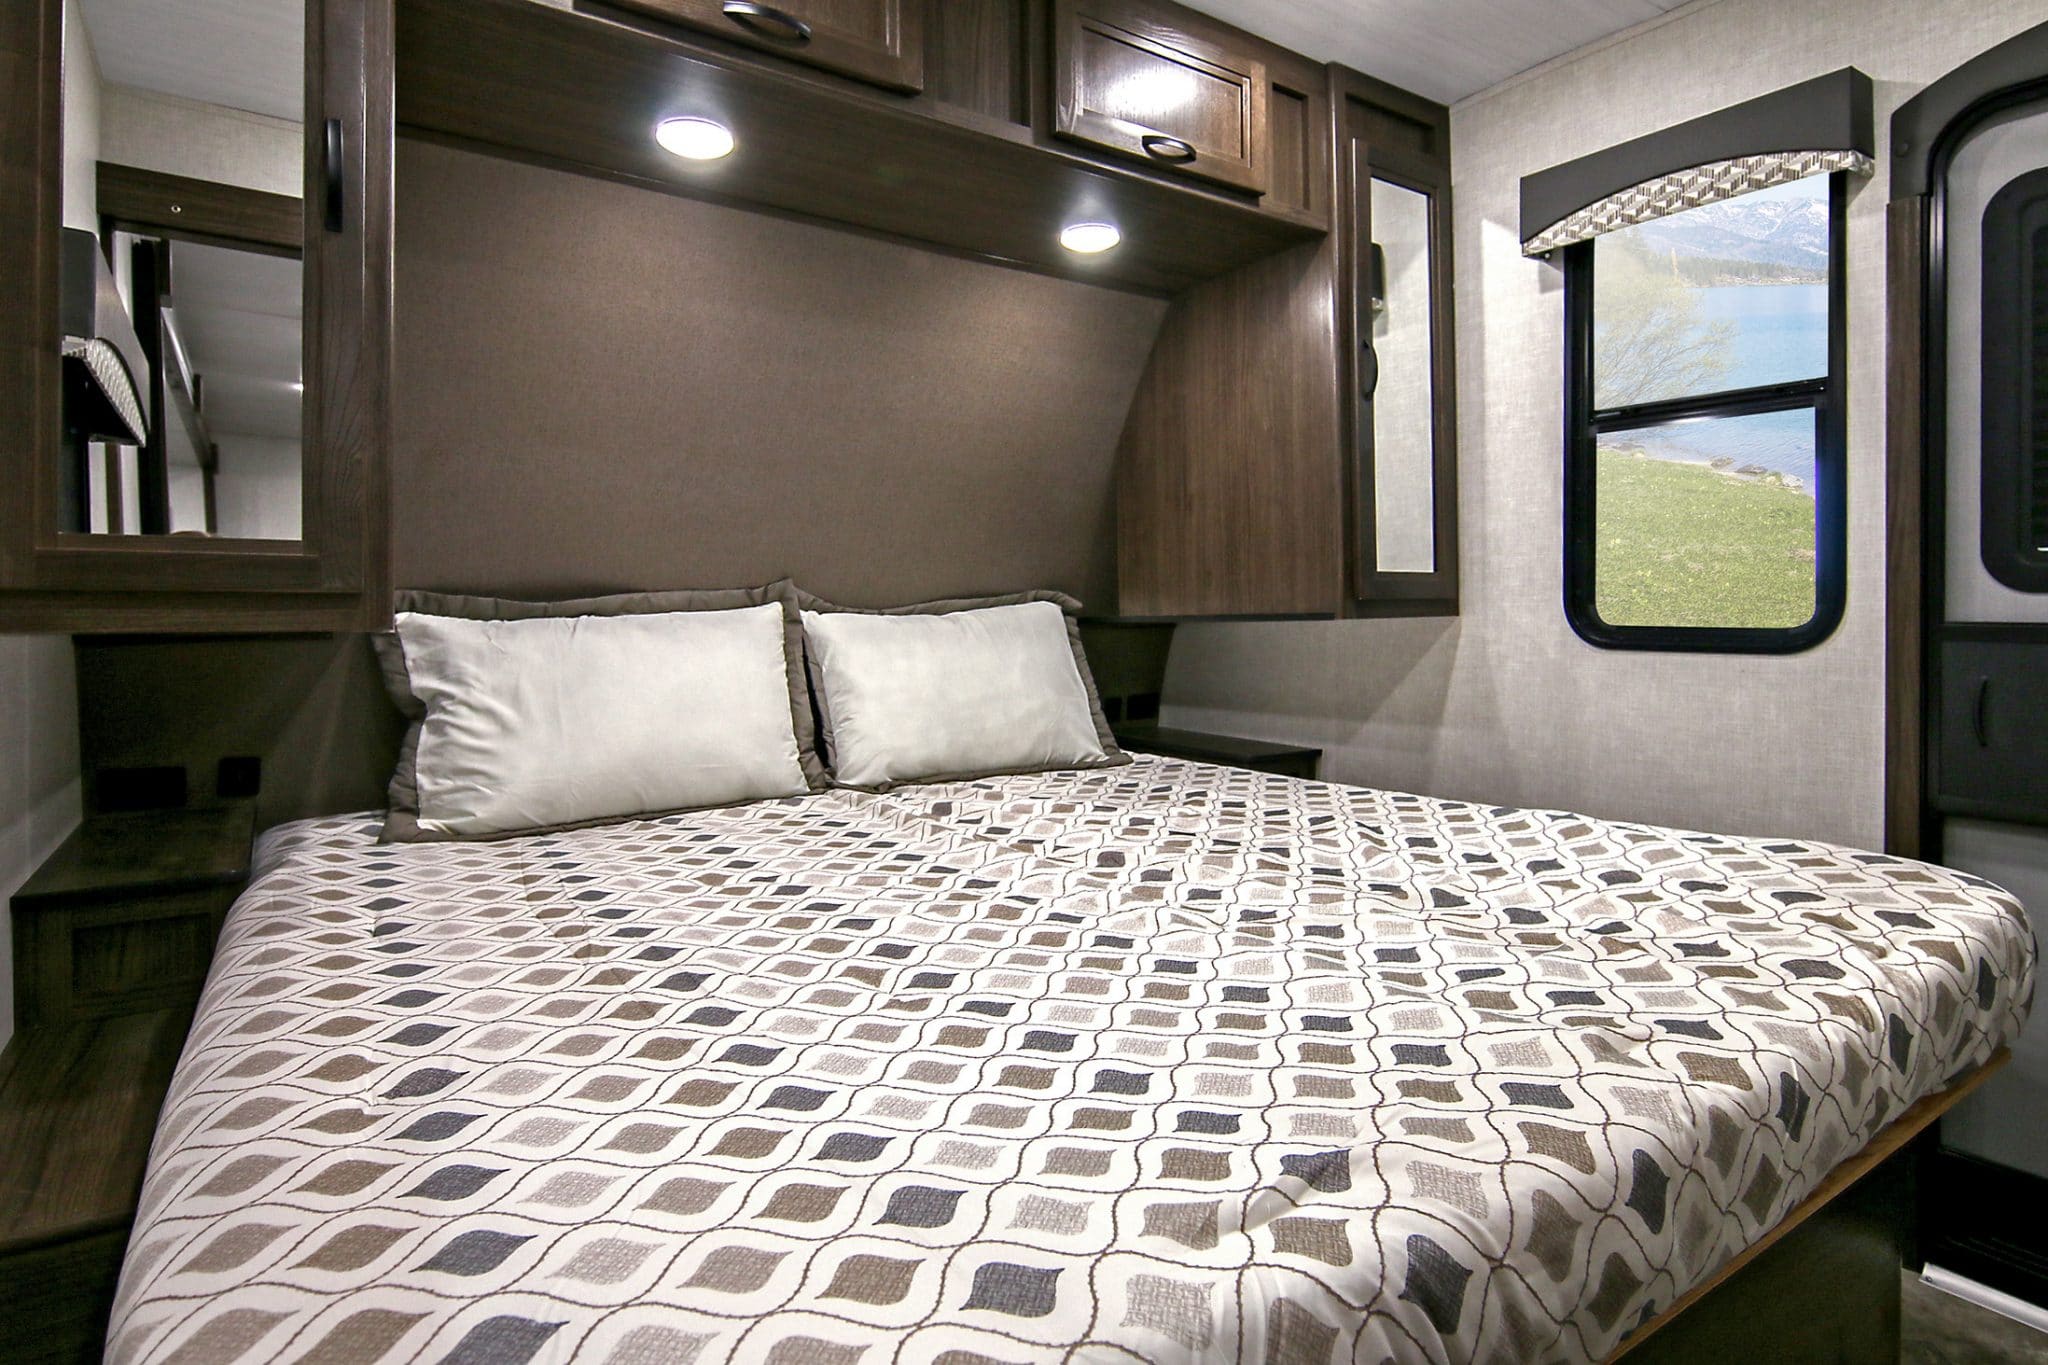 Bed with brown and white bedspread and two pillows in trailer.